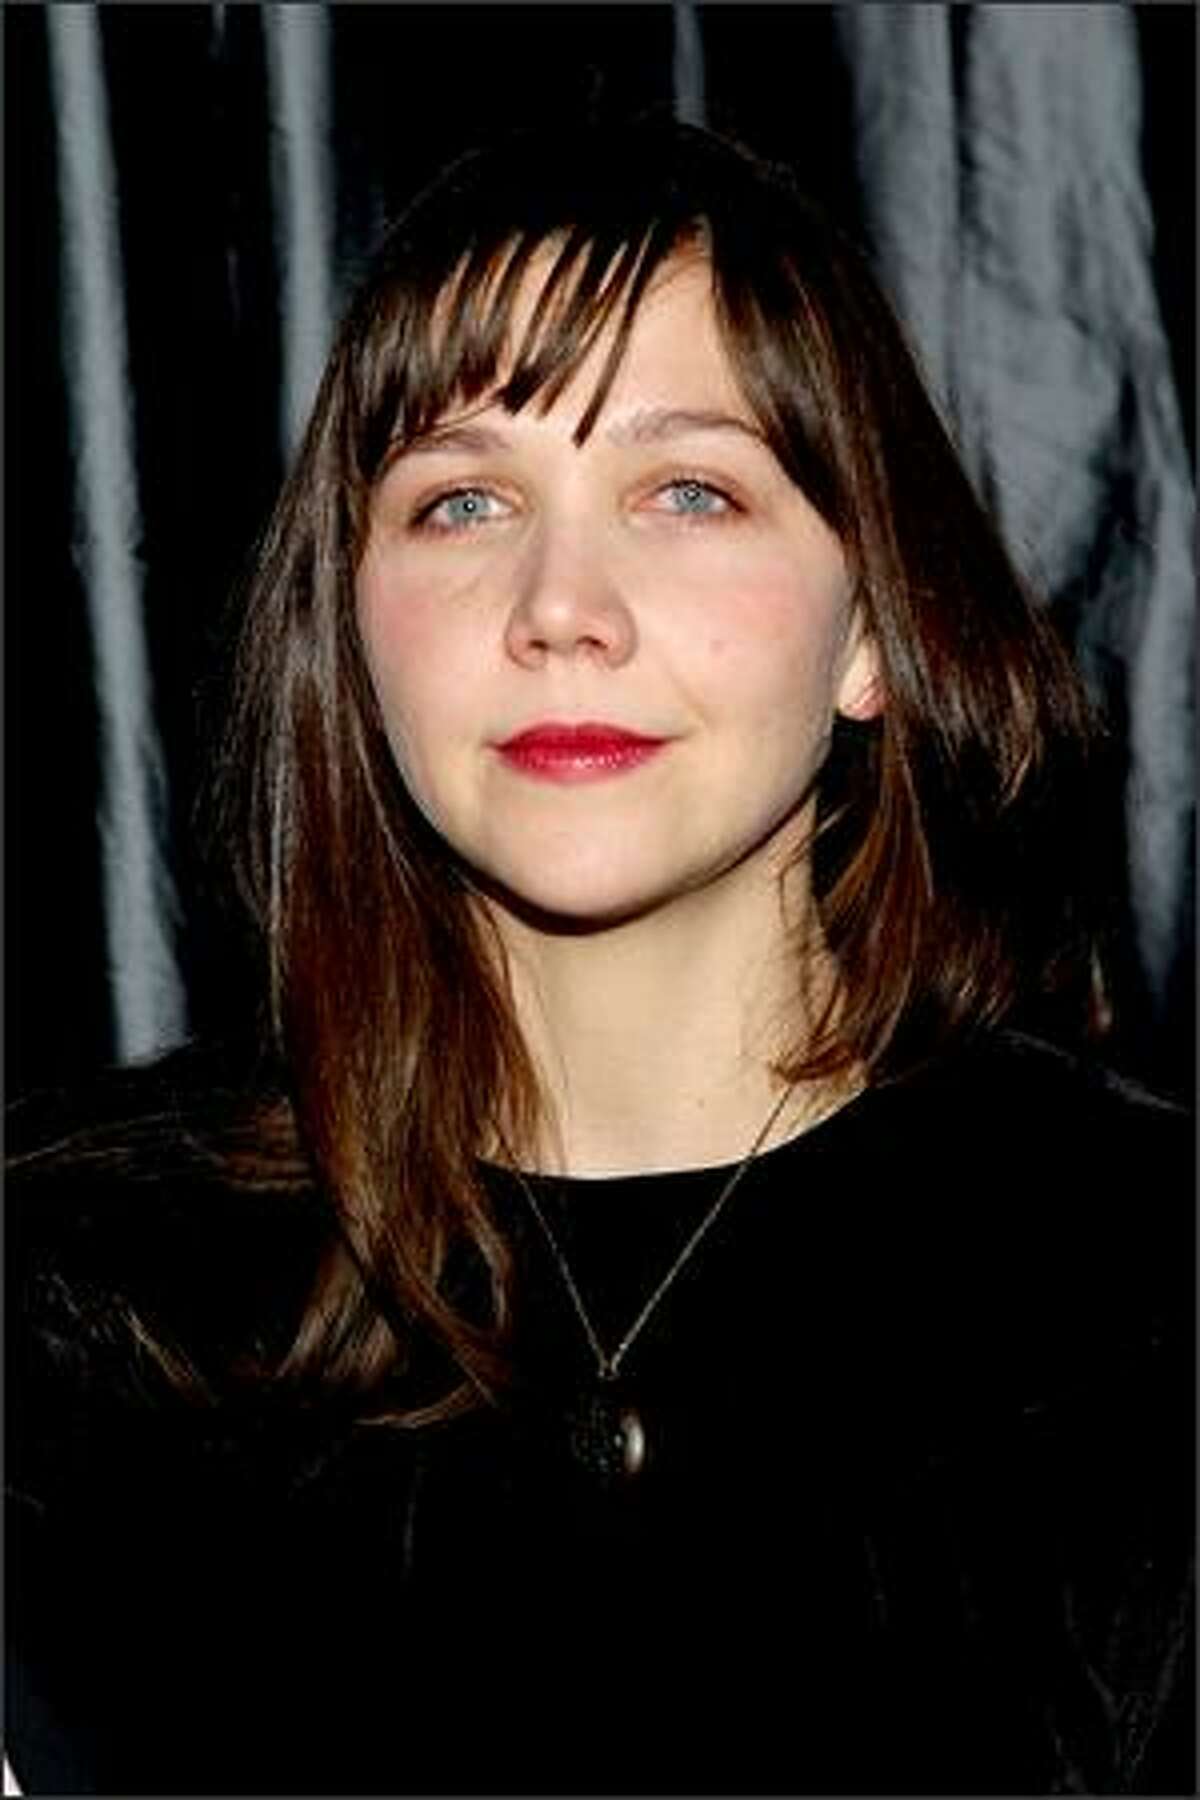 Actress Maggie Gyllenhaal attends the 2007 New York Film Critic's Circle Awards at Spotlight in New York City.